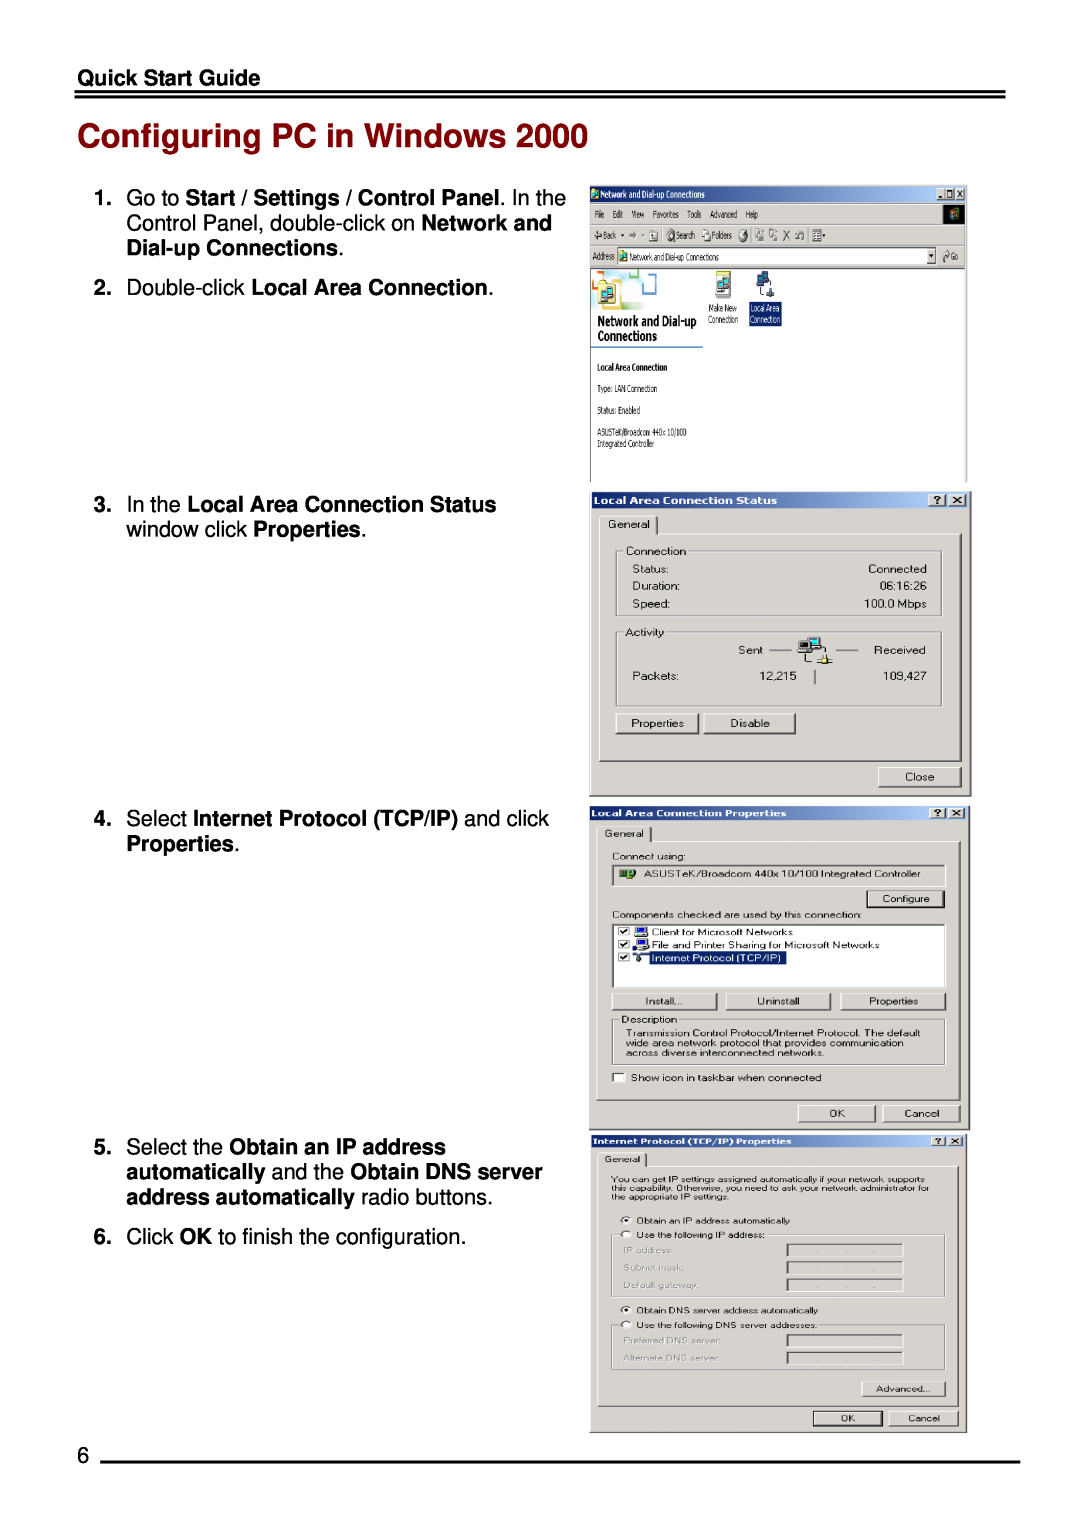 Billion Electric Company BIPAC 7500 Configuring PC in Windows, Double-click Local Area Connection, Quick Start Guide 